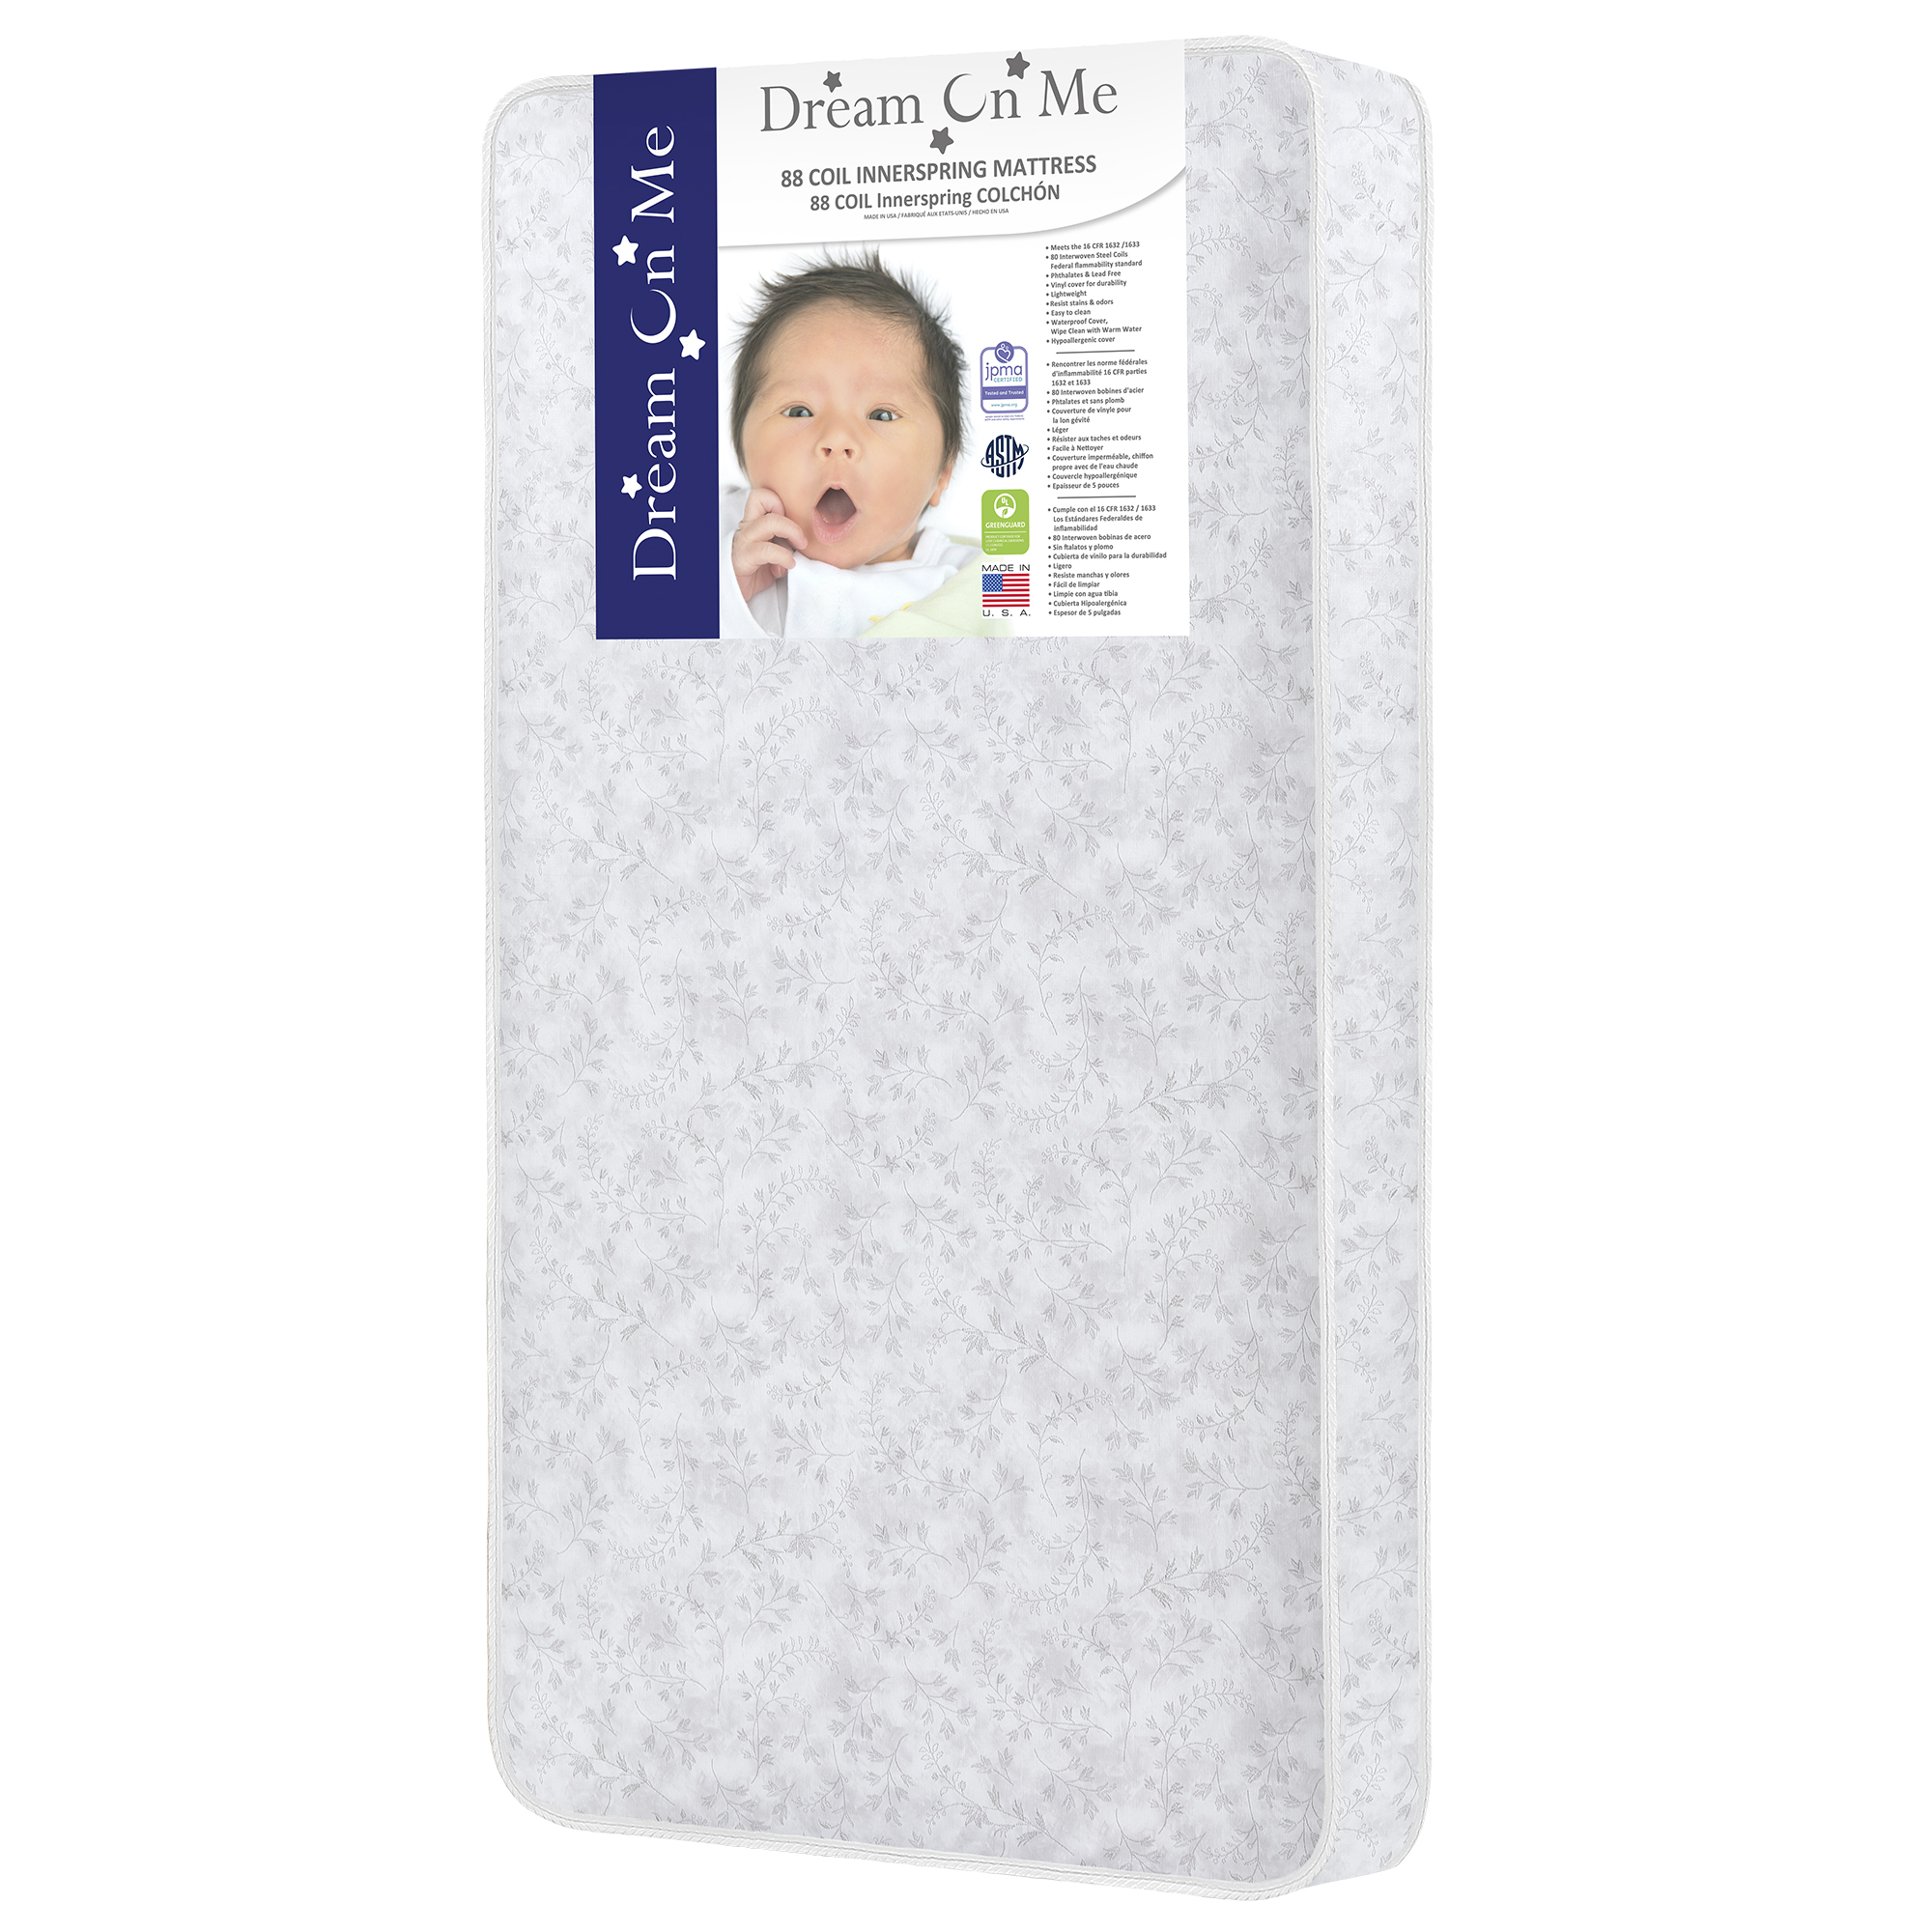 Dream on Me Twinkle 5" 88 Coil Crib & Toddler Mattress, Morning Mist Floral, Greenguard Gold Certified - image 7 of 15